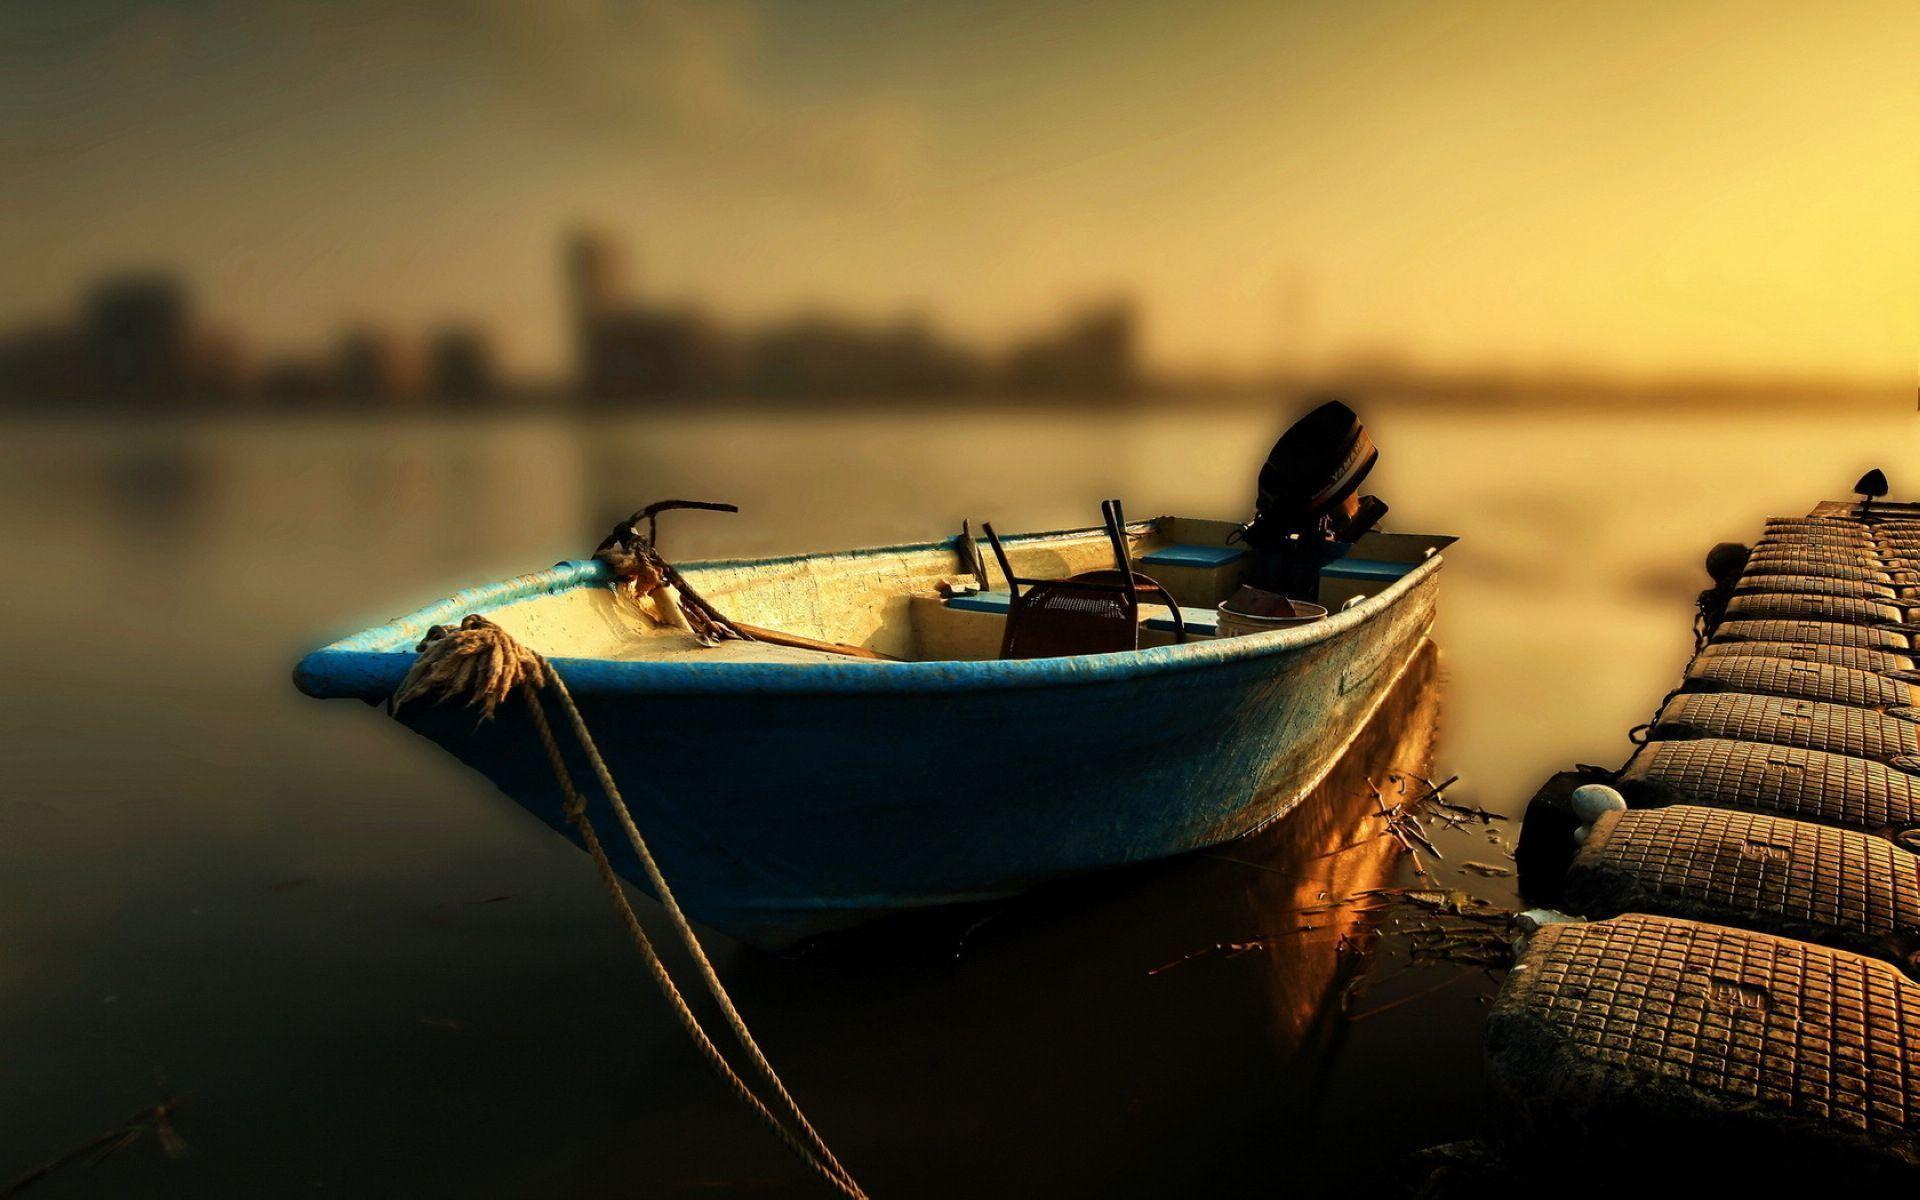 Download Peaceful Boat Wallpaper 17600 1920x1200 px High